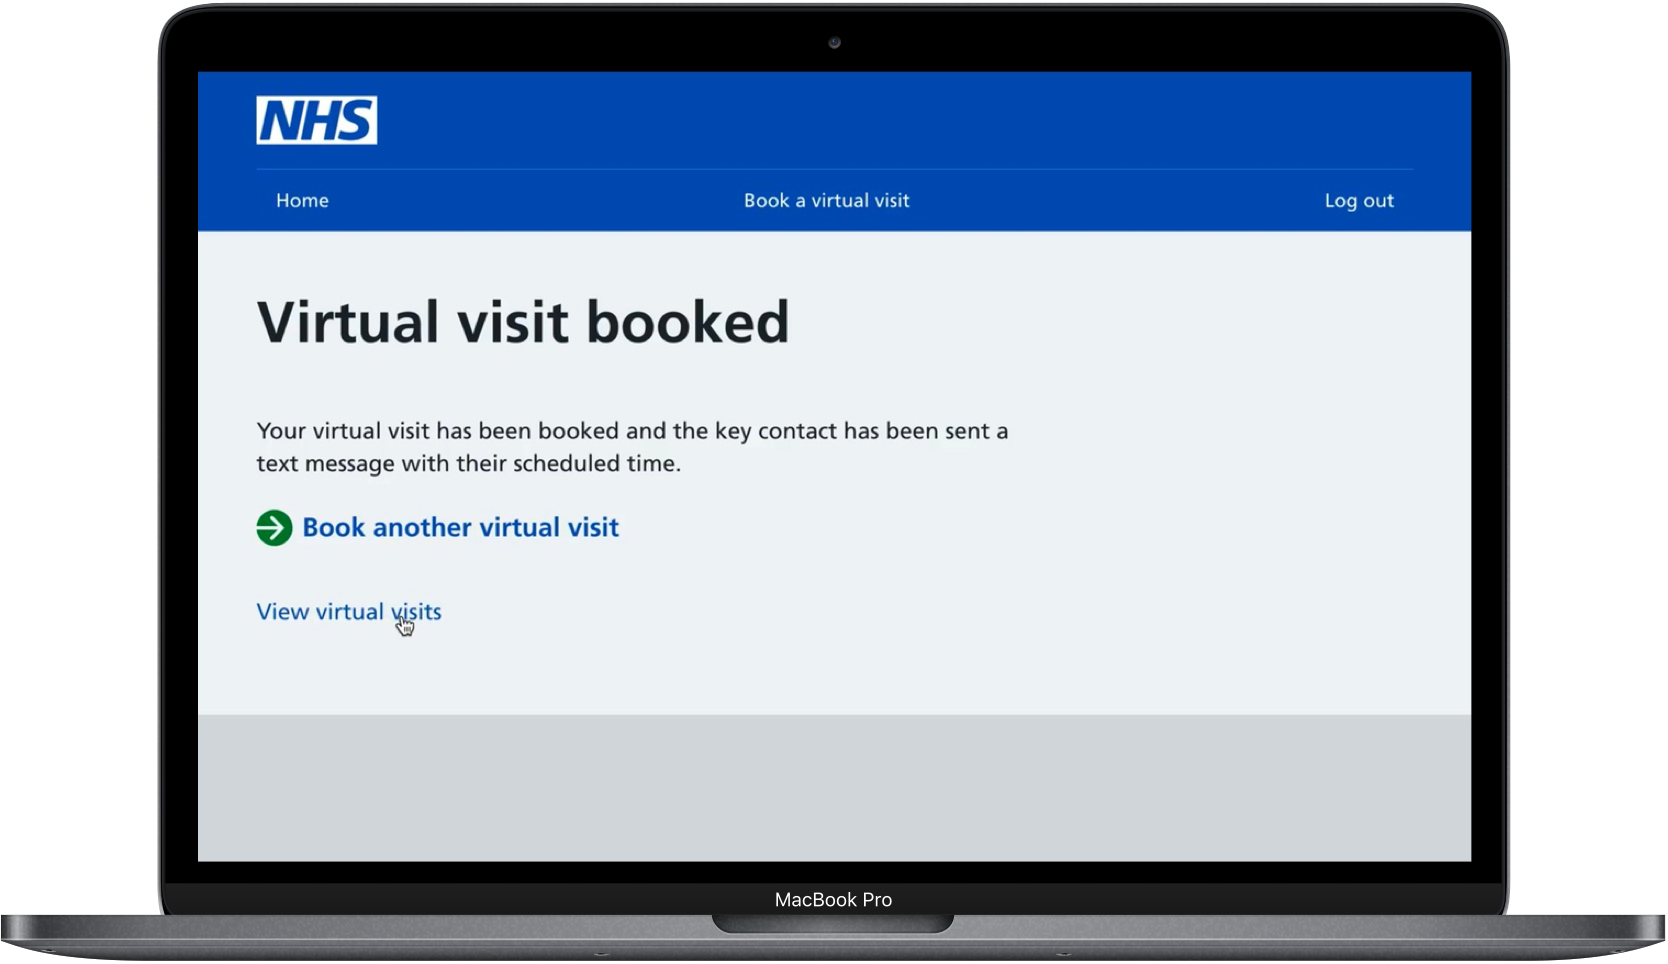 Image showing the NHS virtual visit booked webpage open on laptop